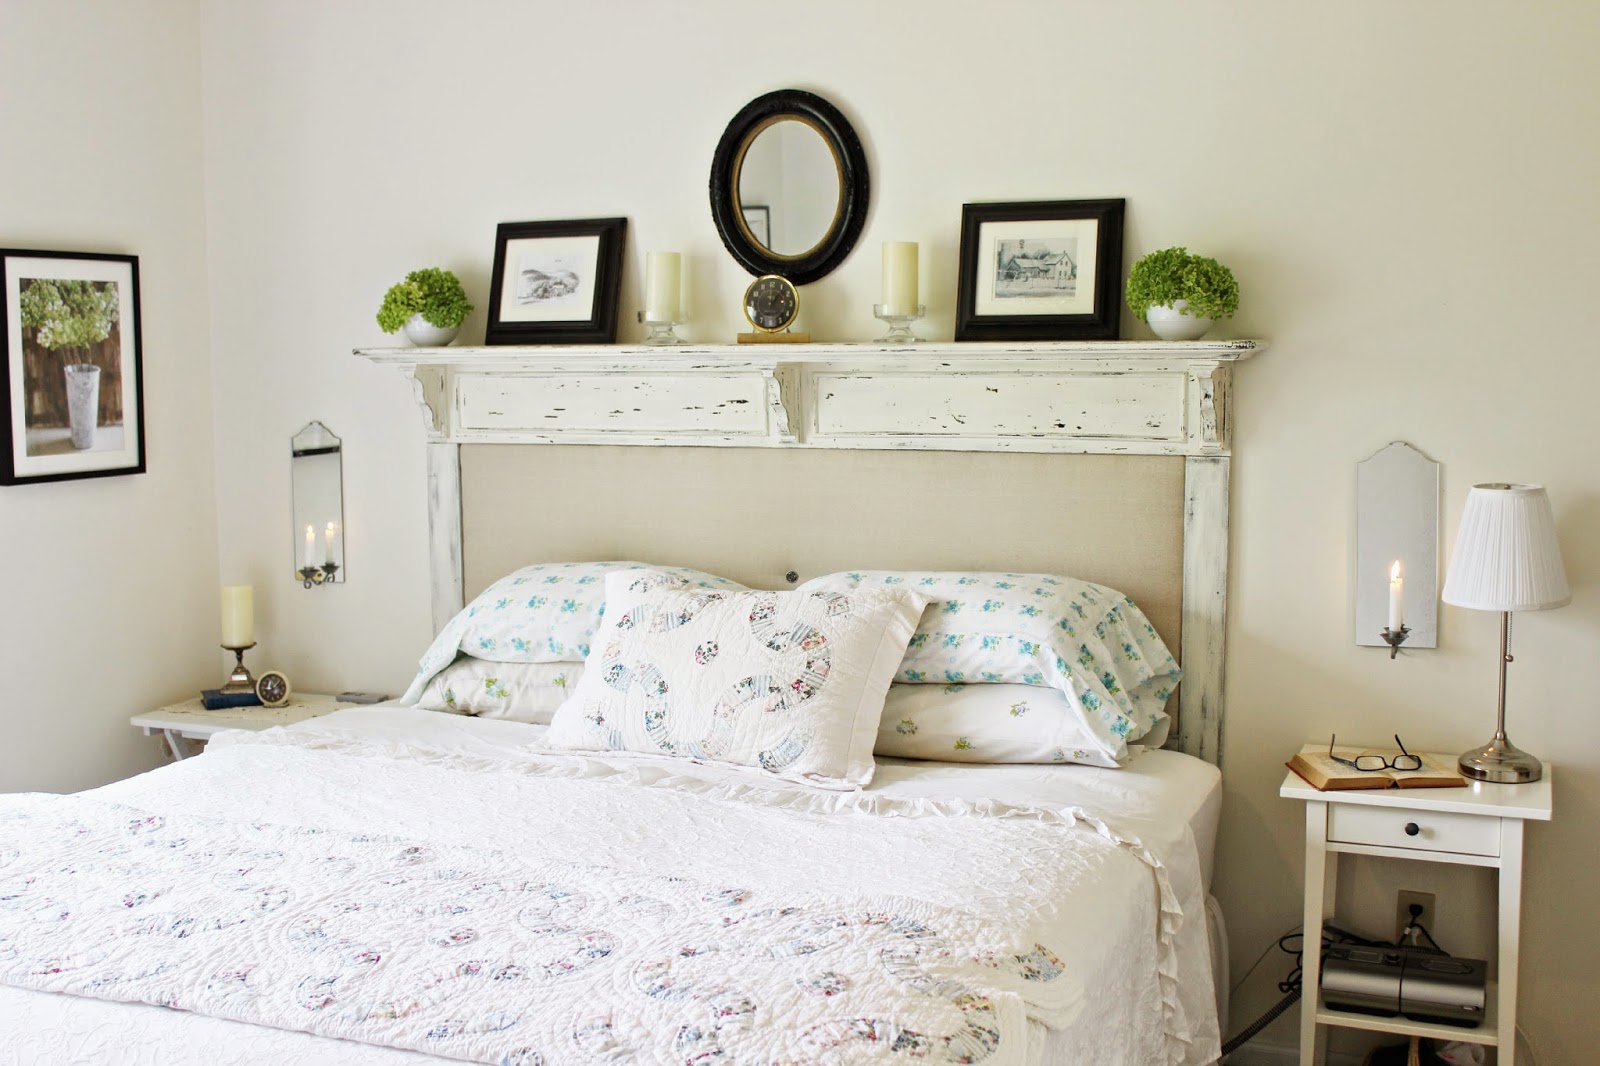 15 Amazing DIY Headboard Projects For Your Bedroom